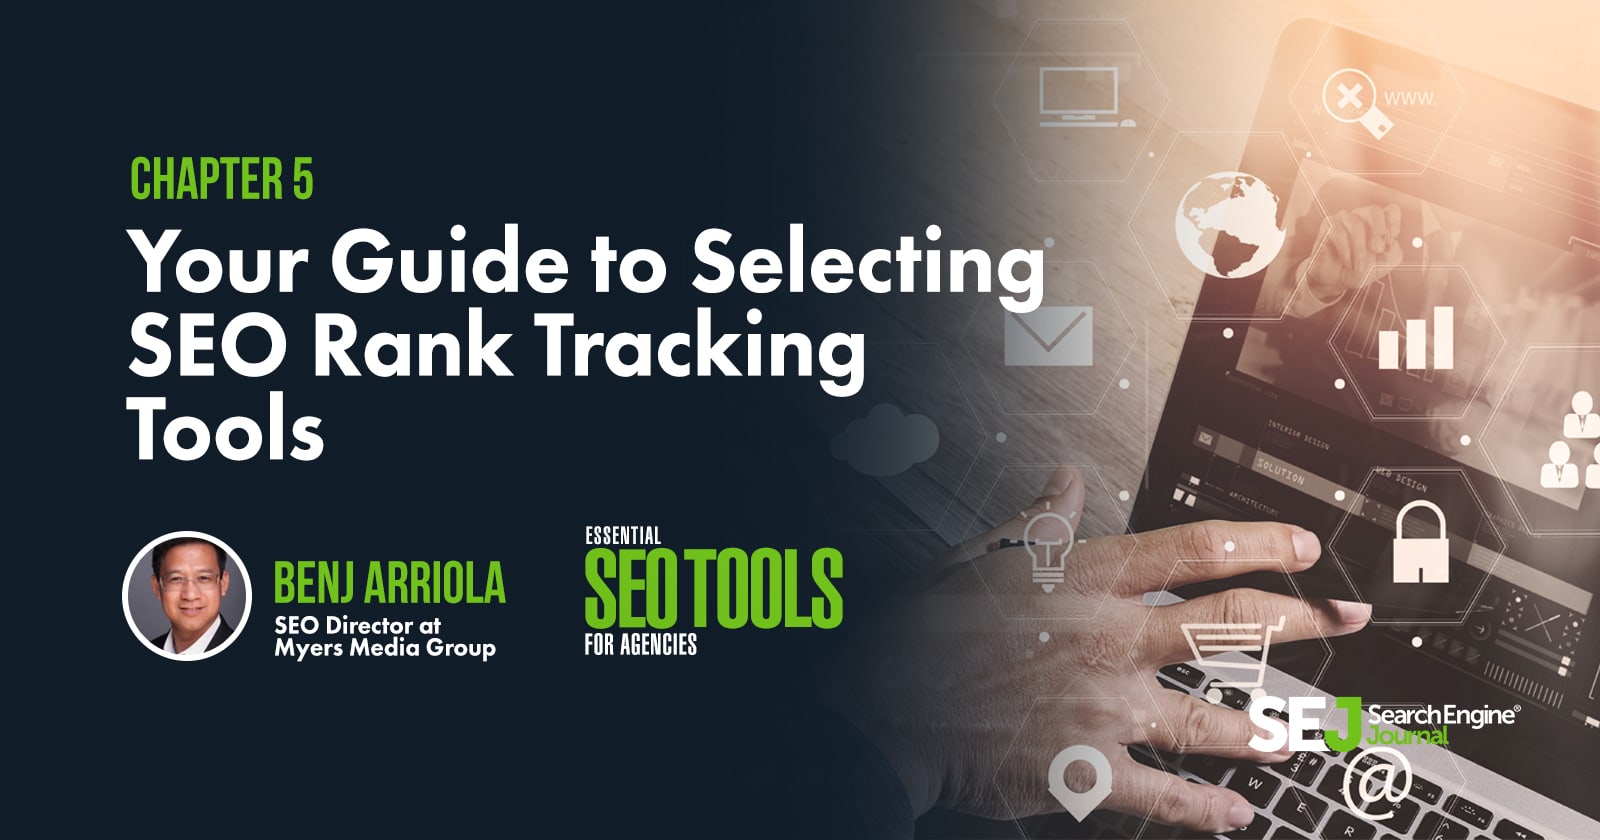 Guide to Selecting SEO Rank Tracking Tools